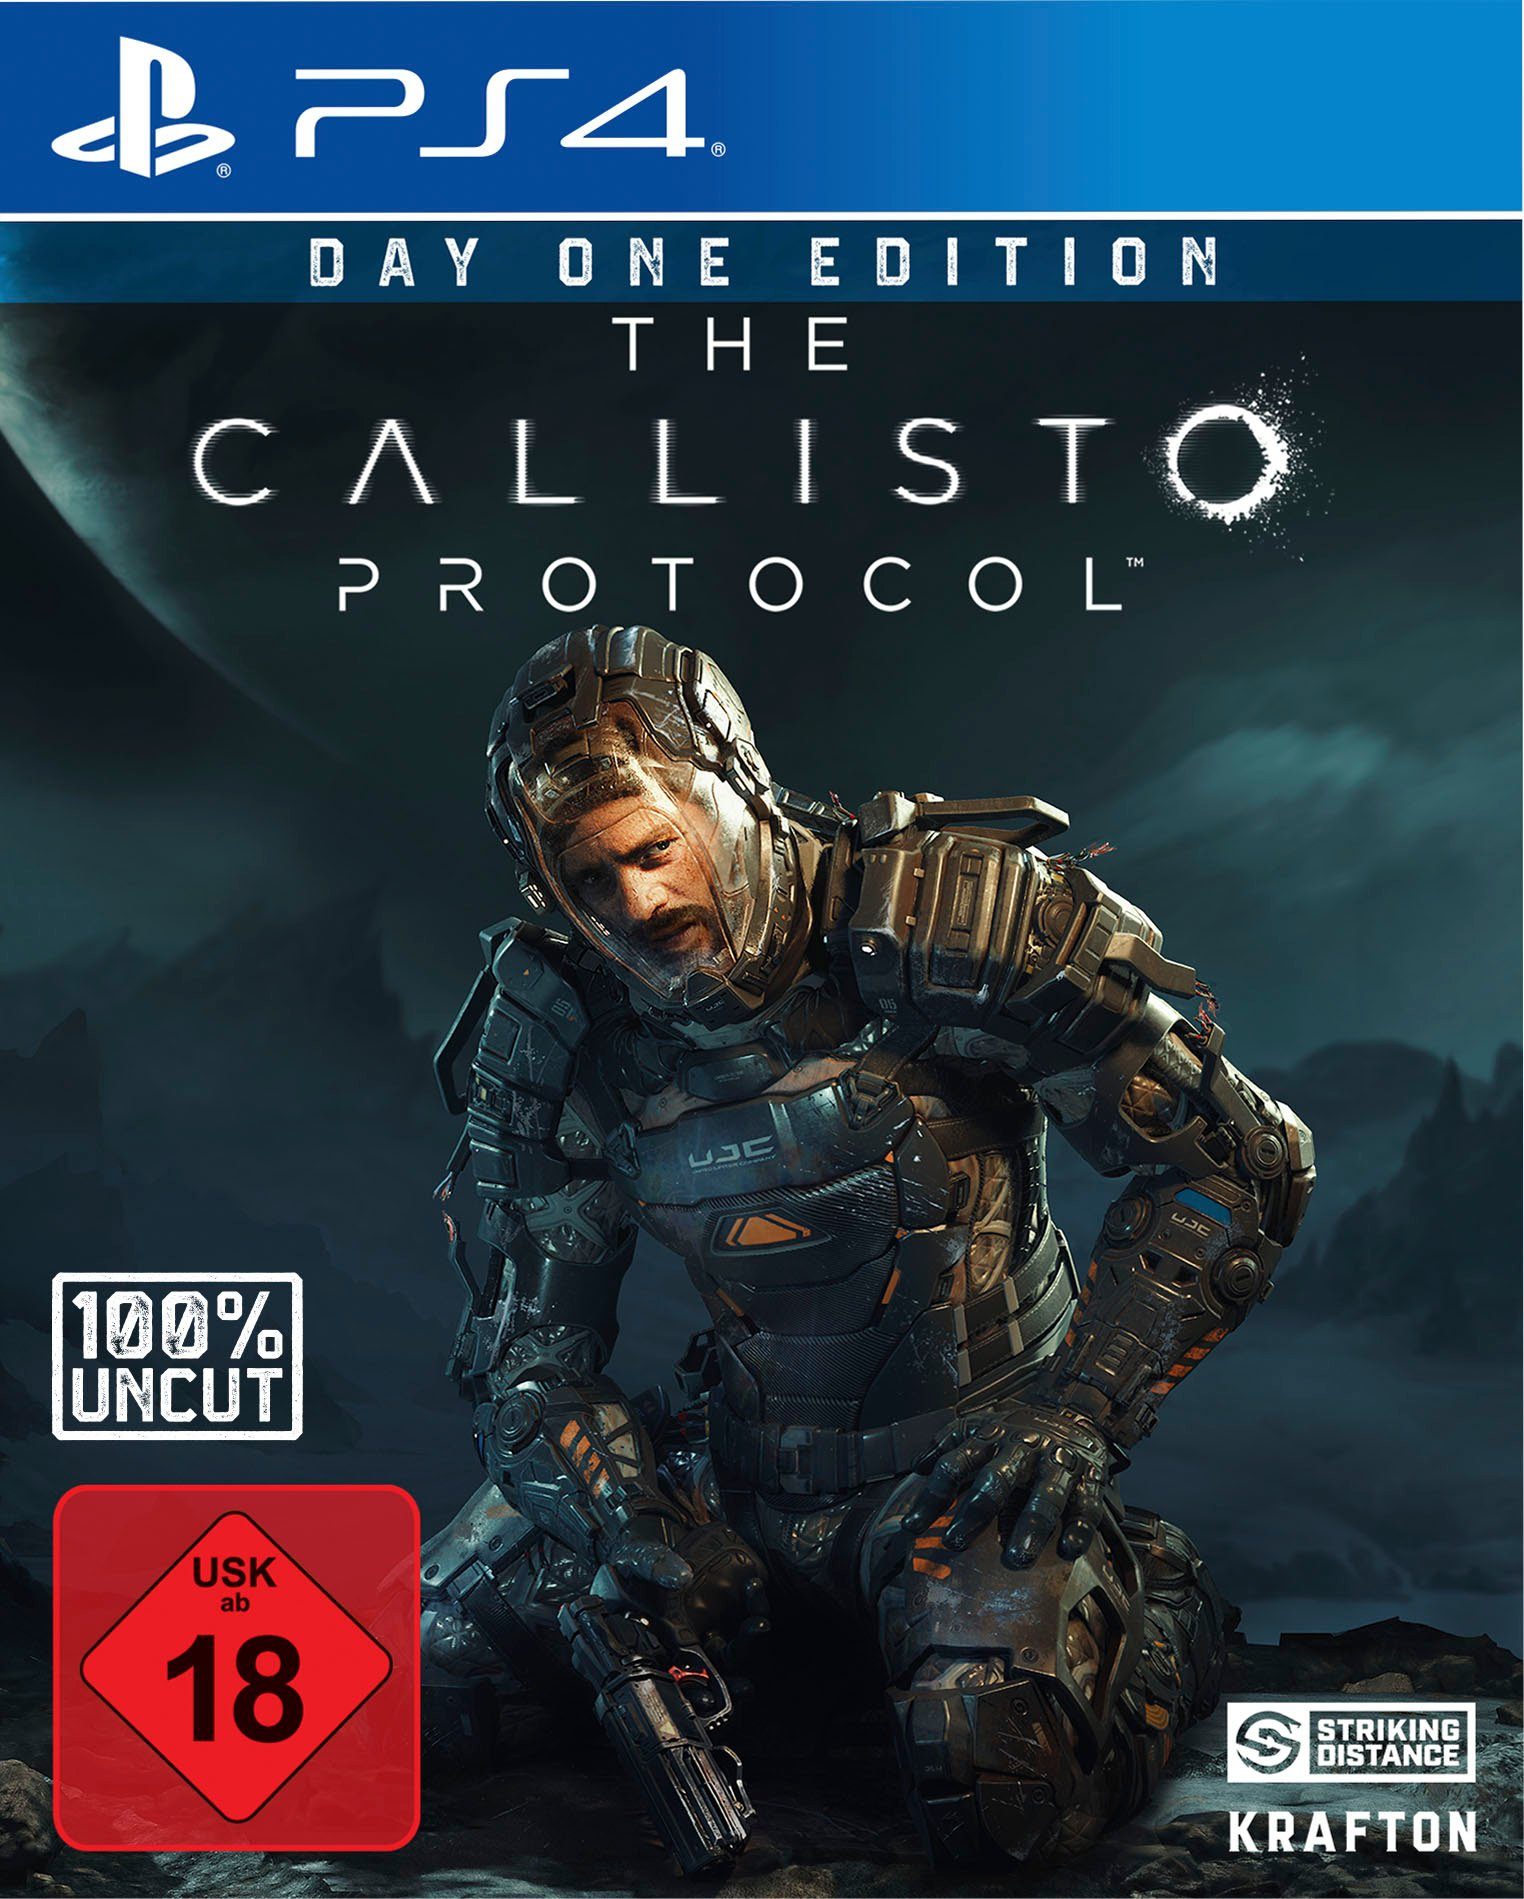 Skybound Games The Callisto PlayStation One 4 Protocol Day